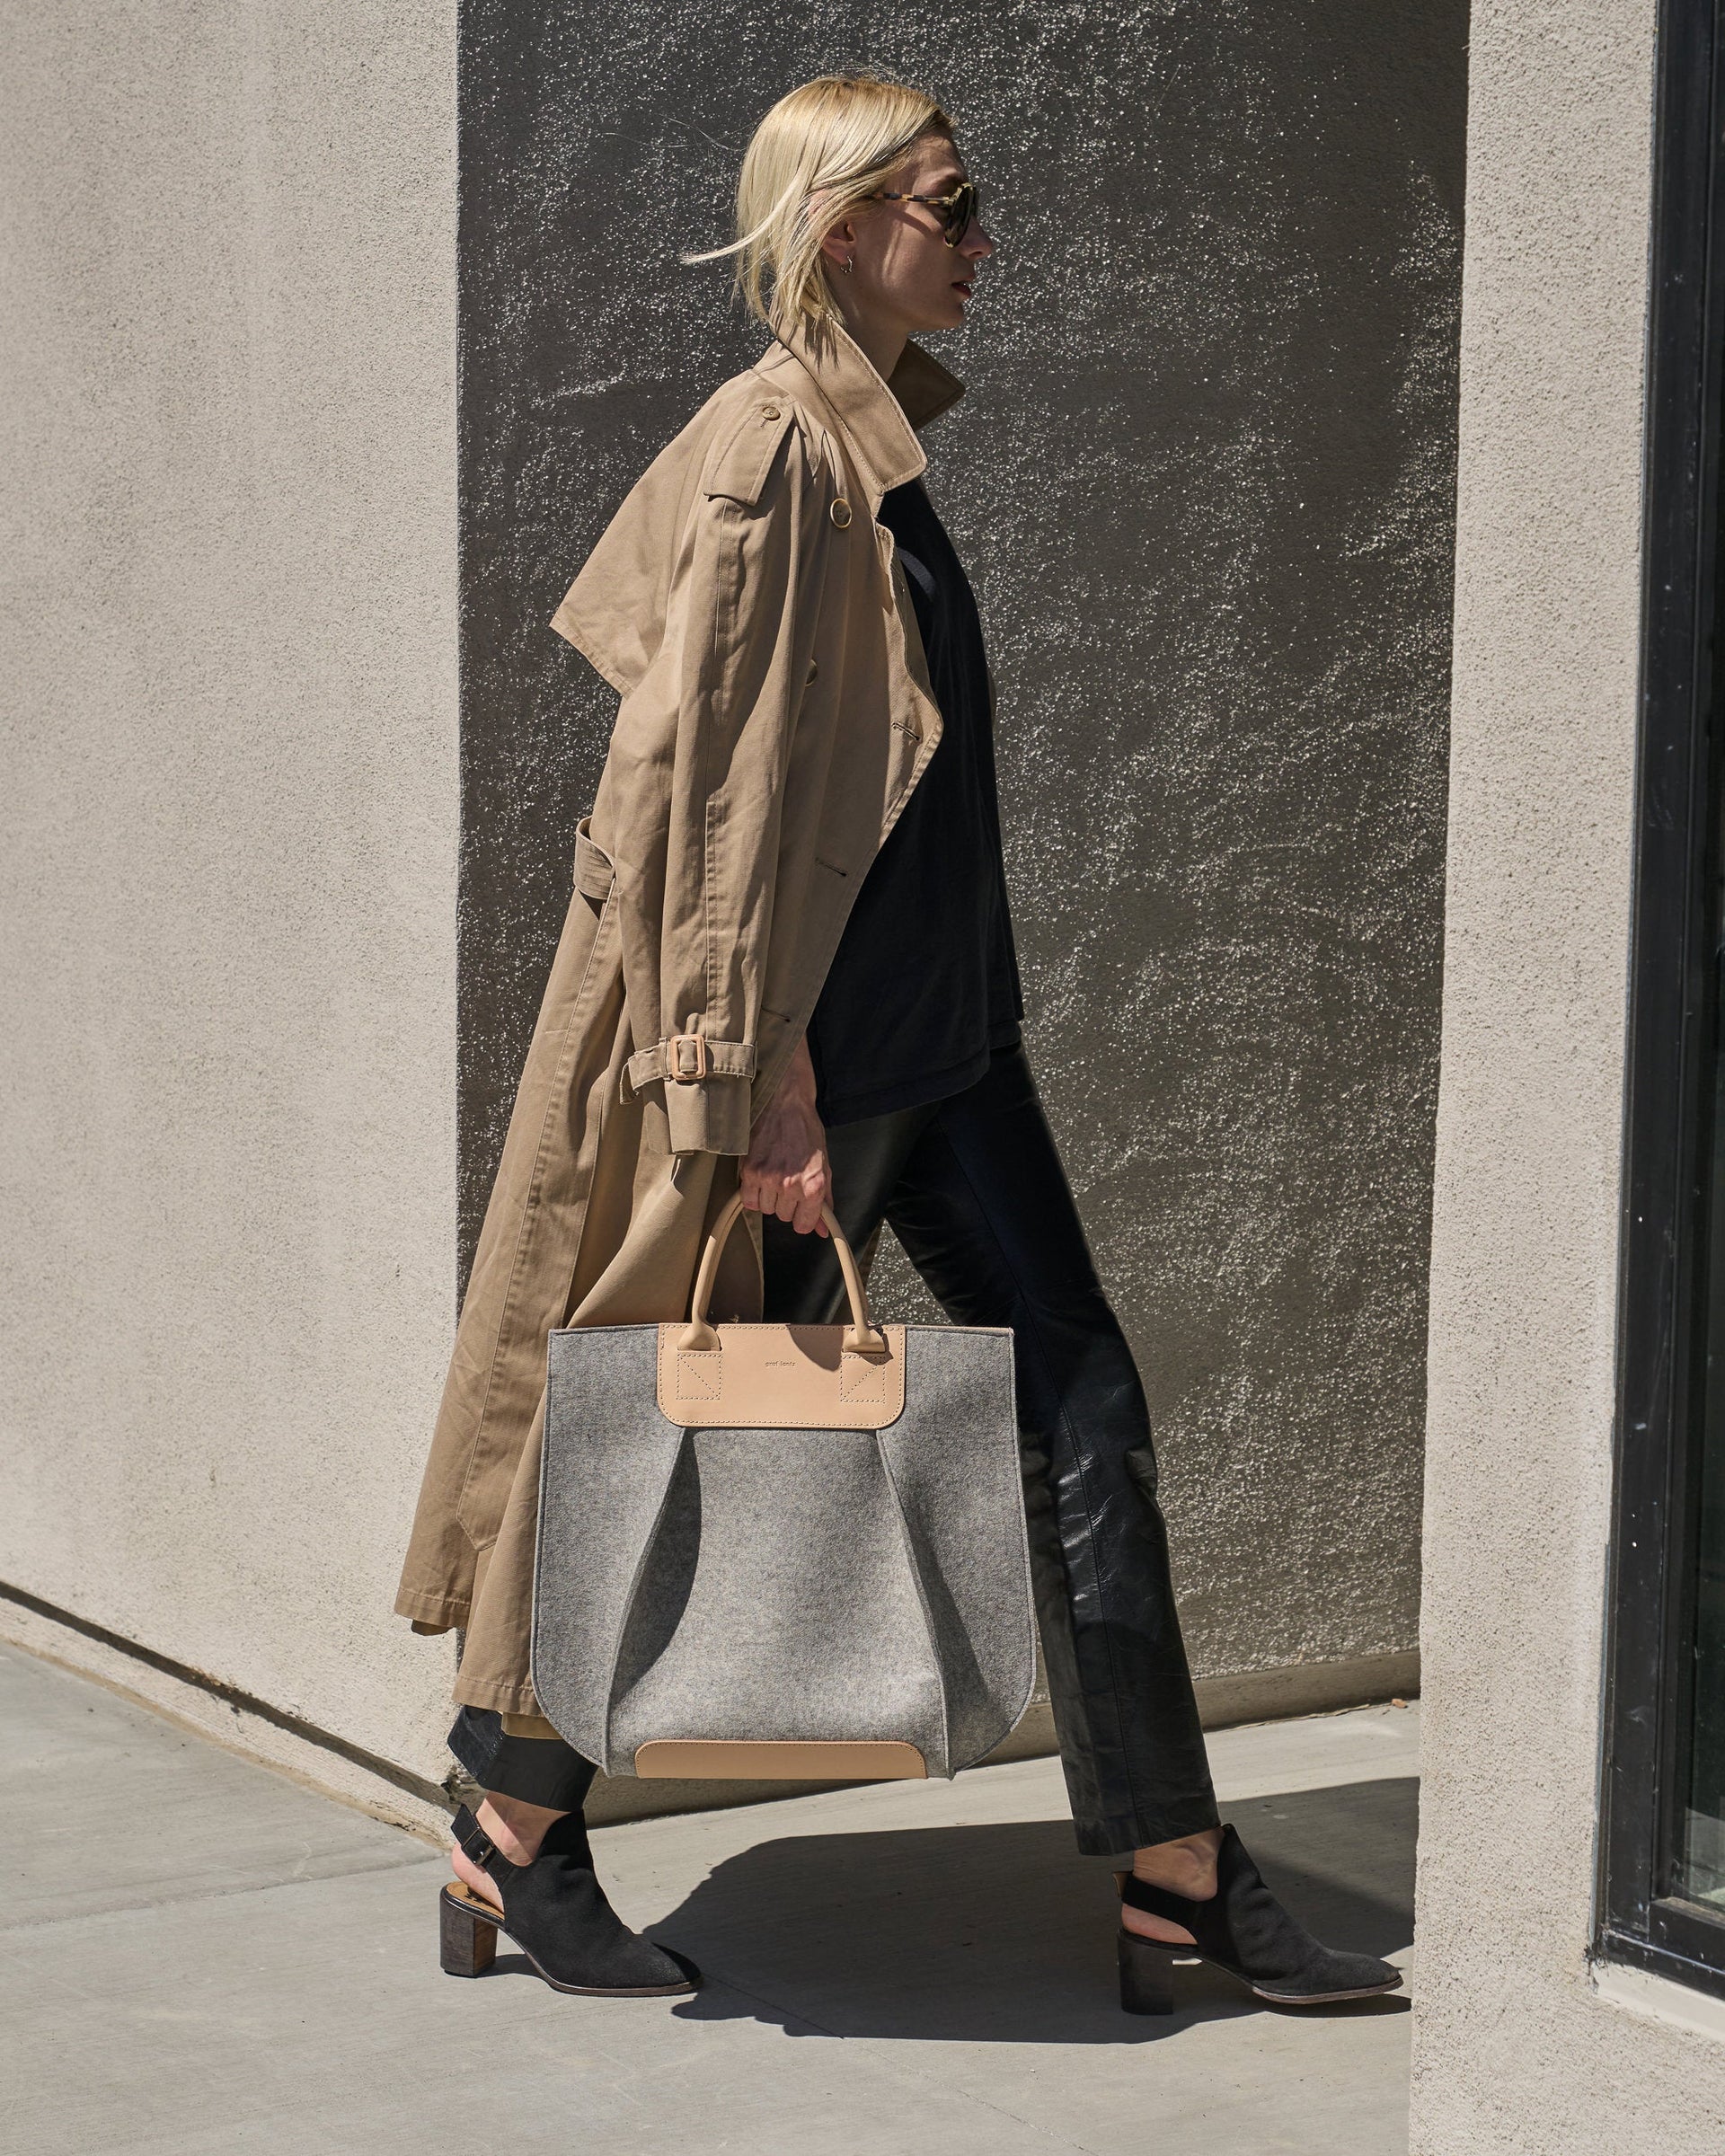 A Frankie Merino Wool Felt Tote carried by a woman, showcasing its handle-lengths and beige and grey colors